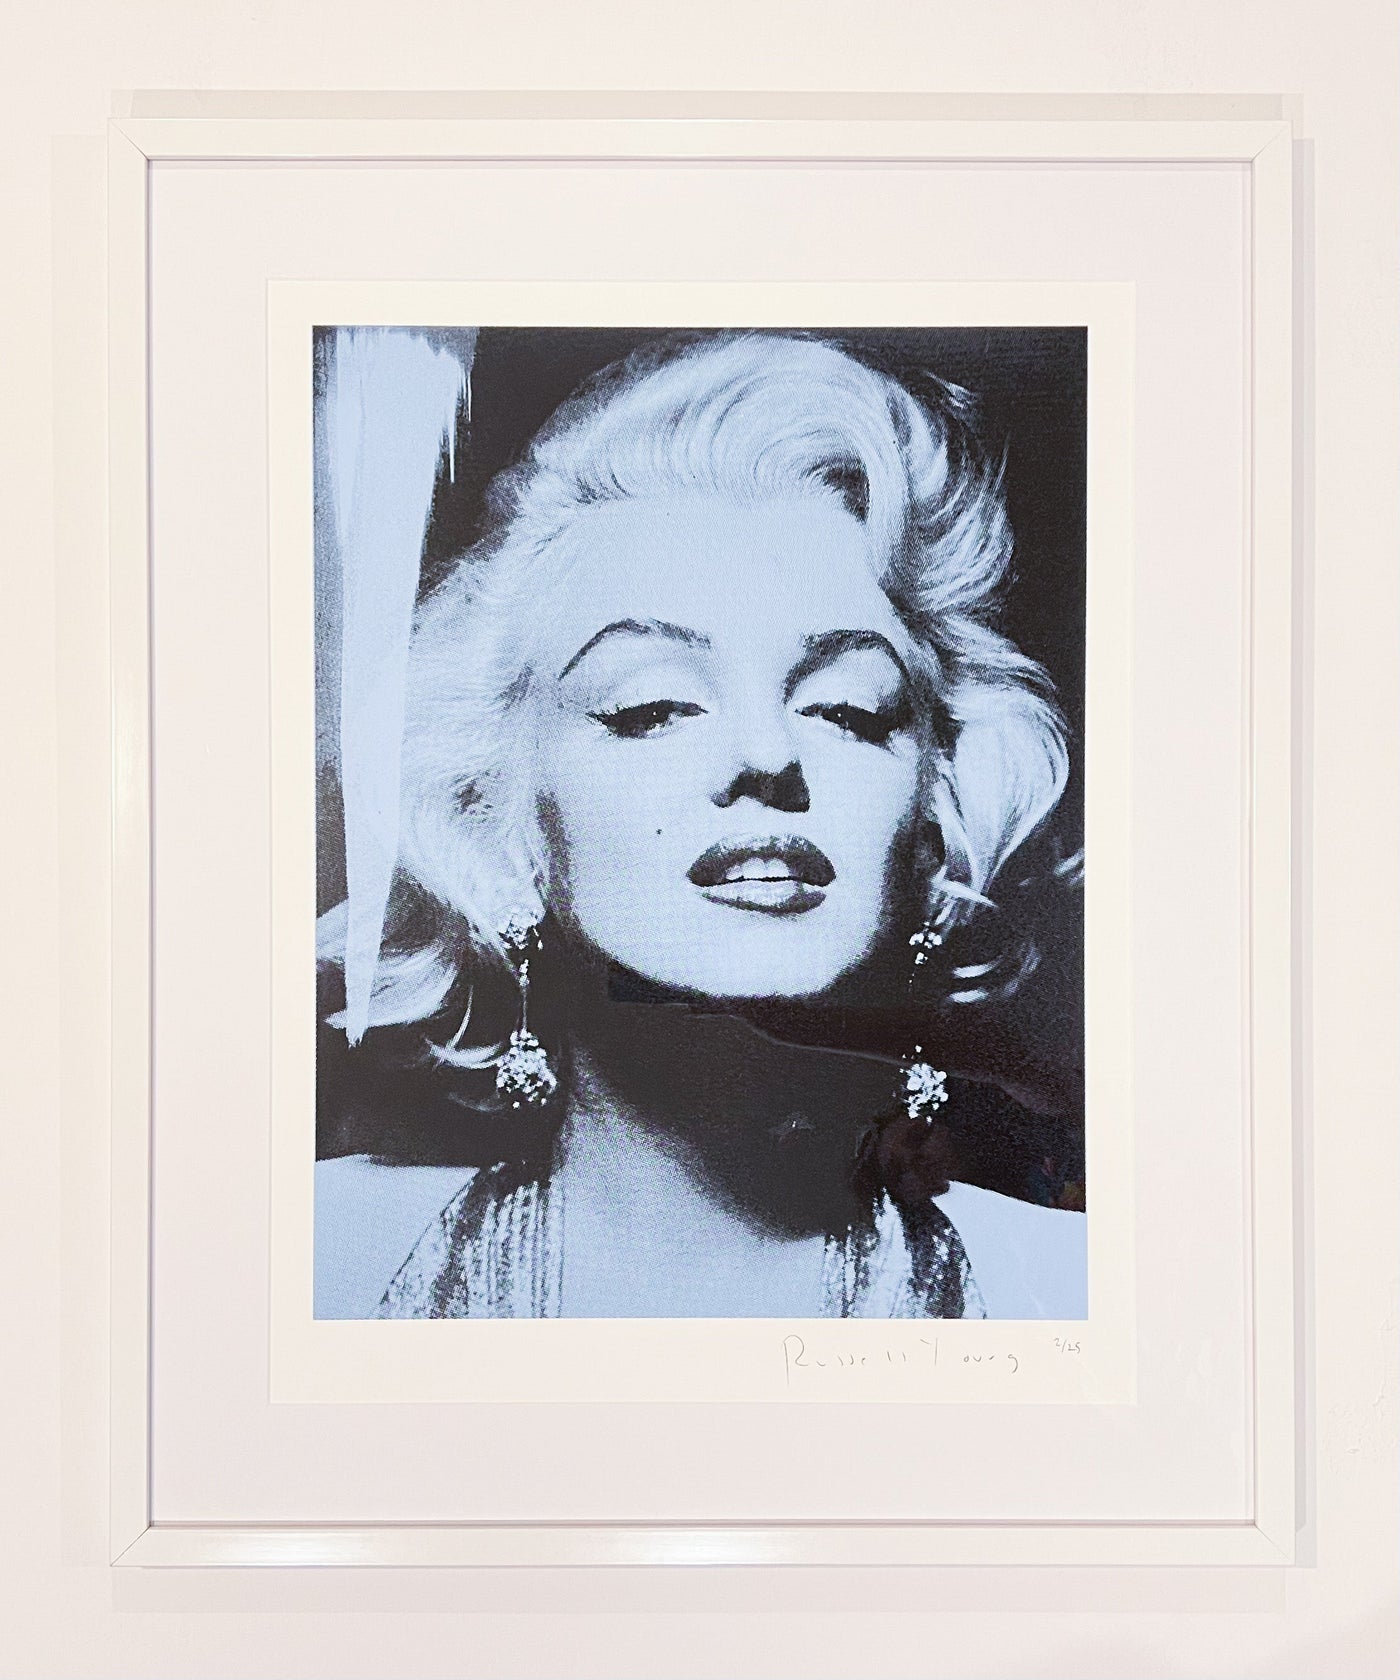 Russell Young Marilyn Portrait (Blue) 2014